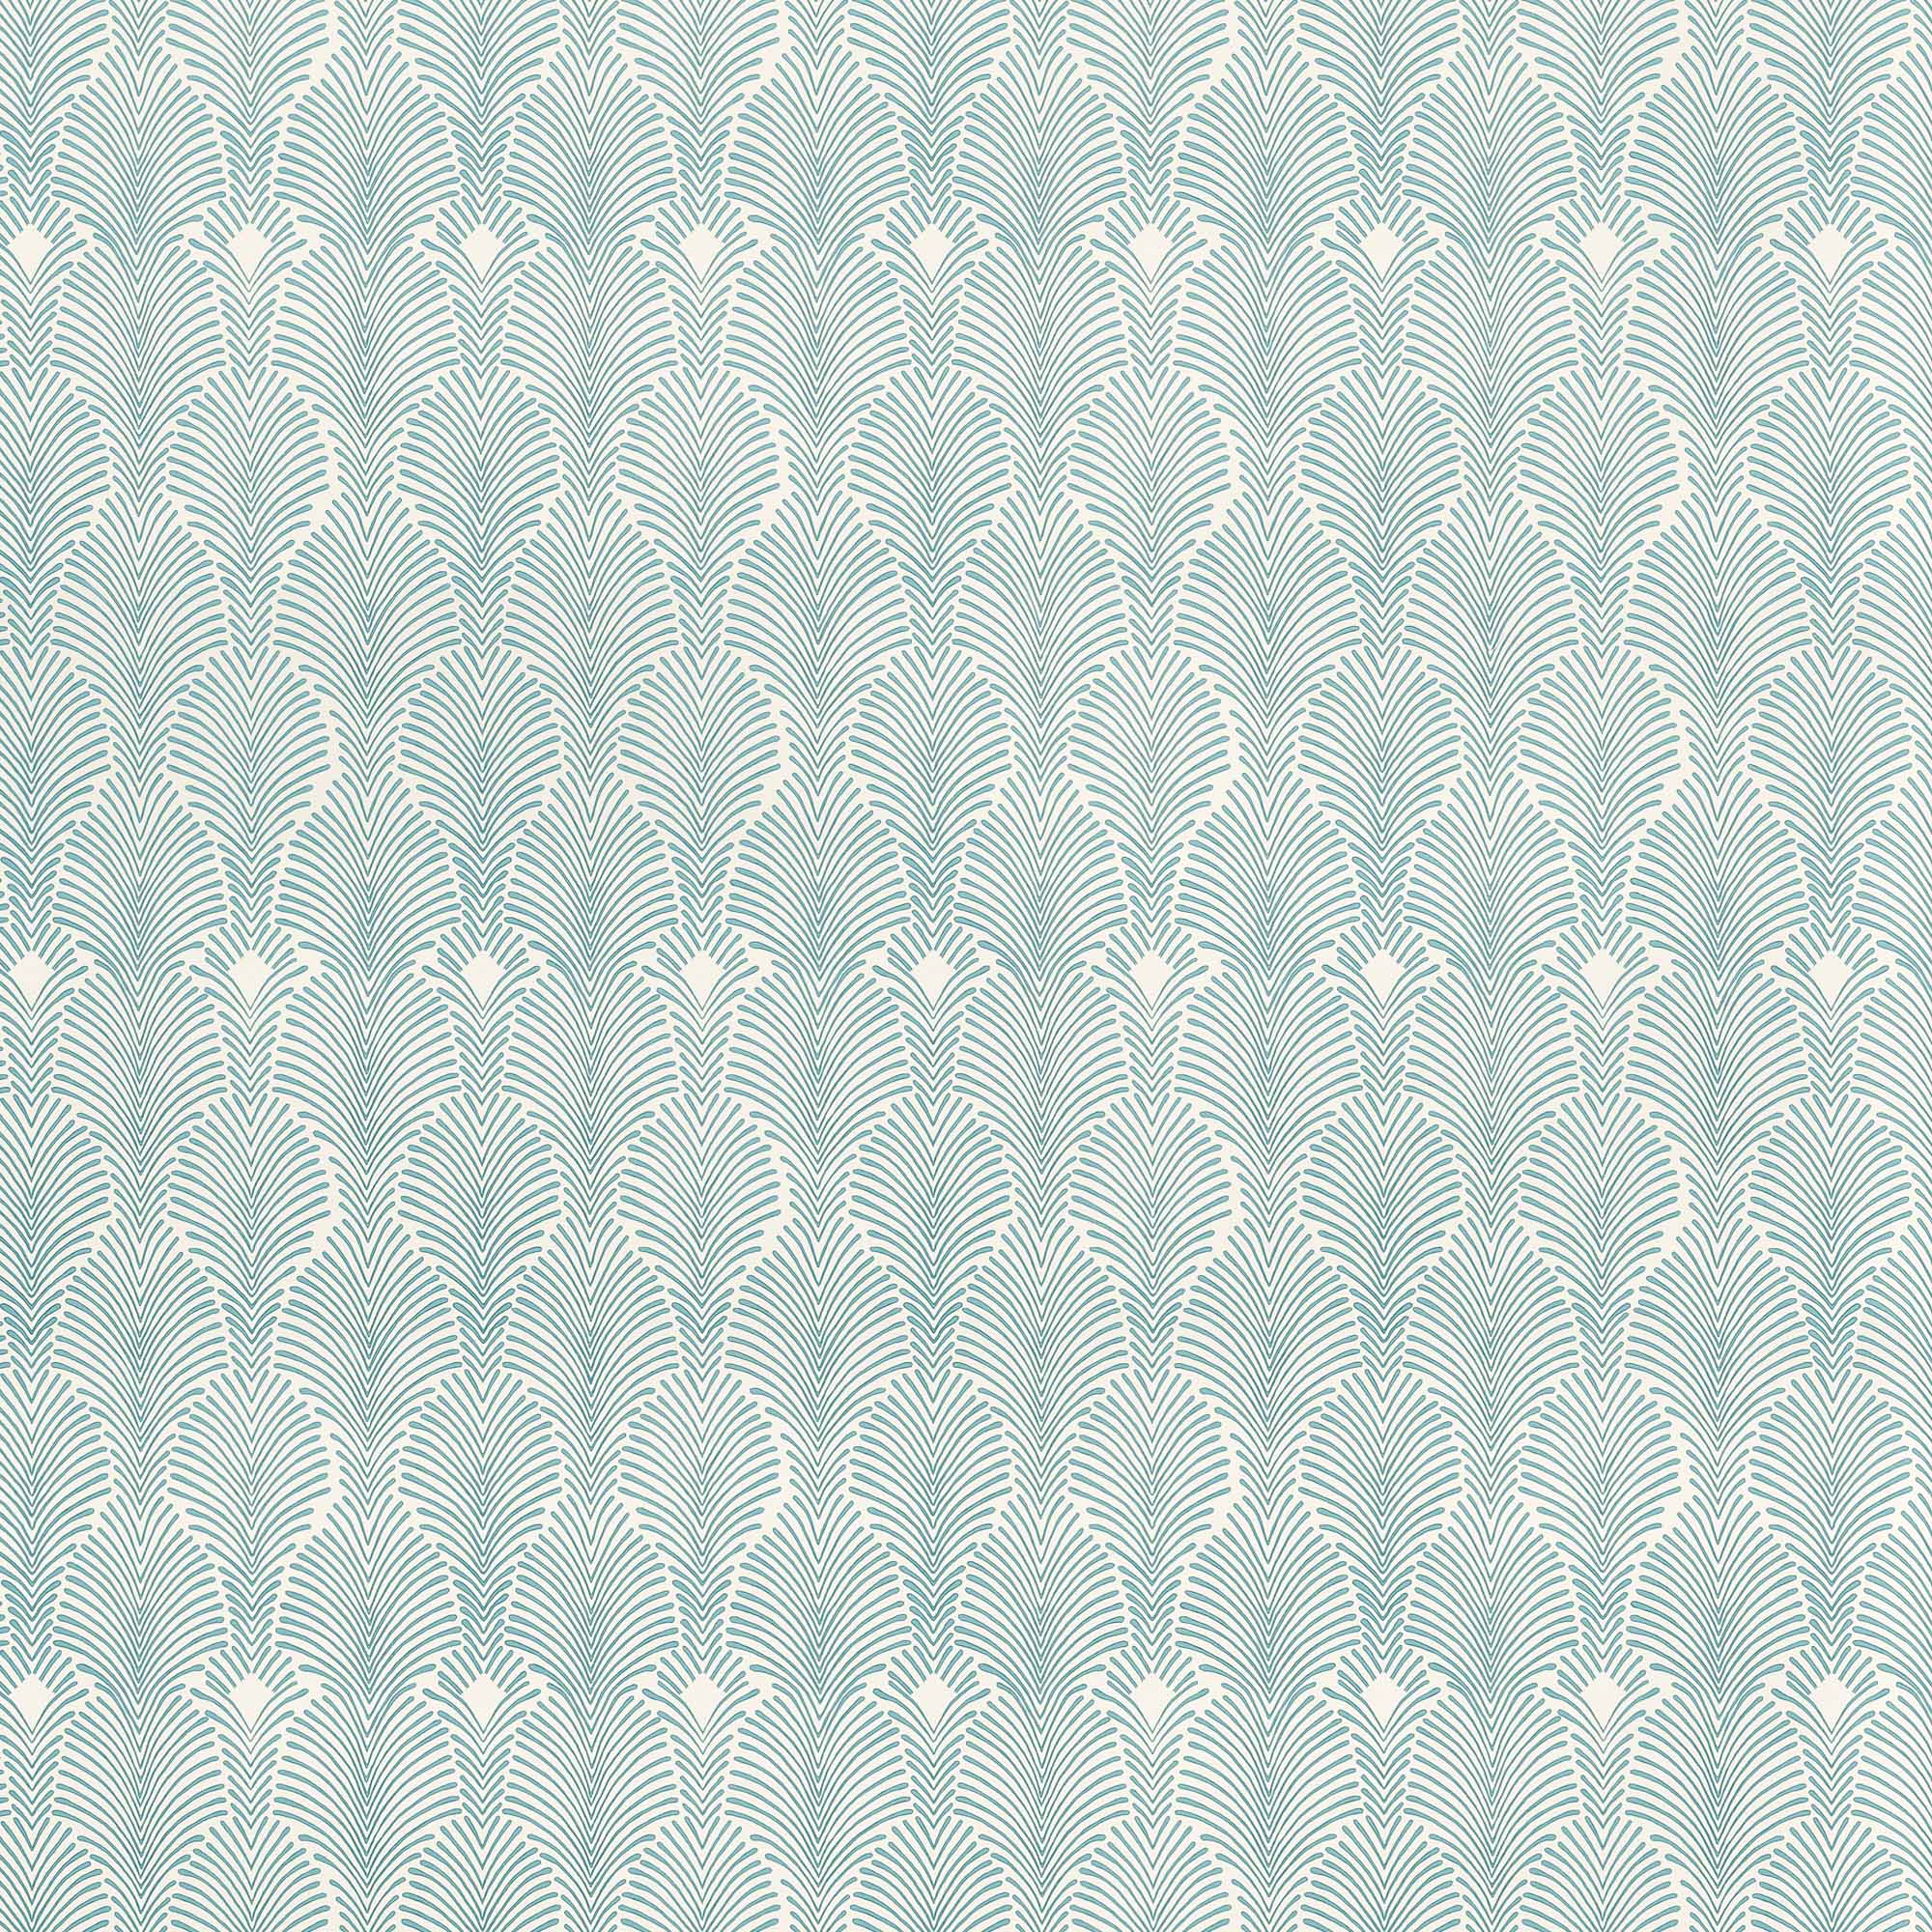 Detail of wallpaper in an art deco damask print in blue on a white field.